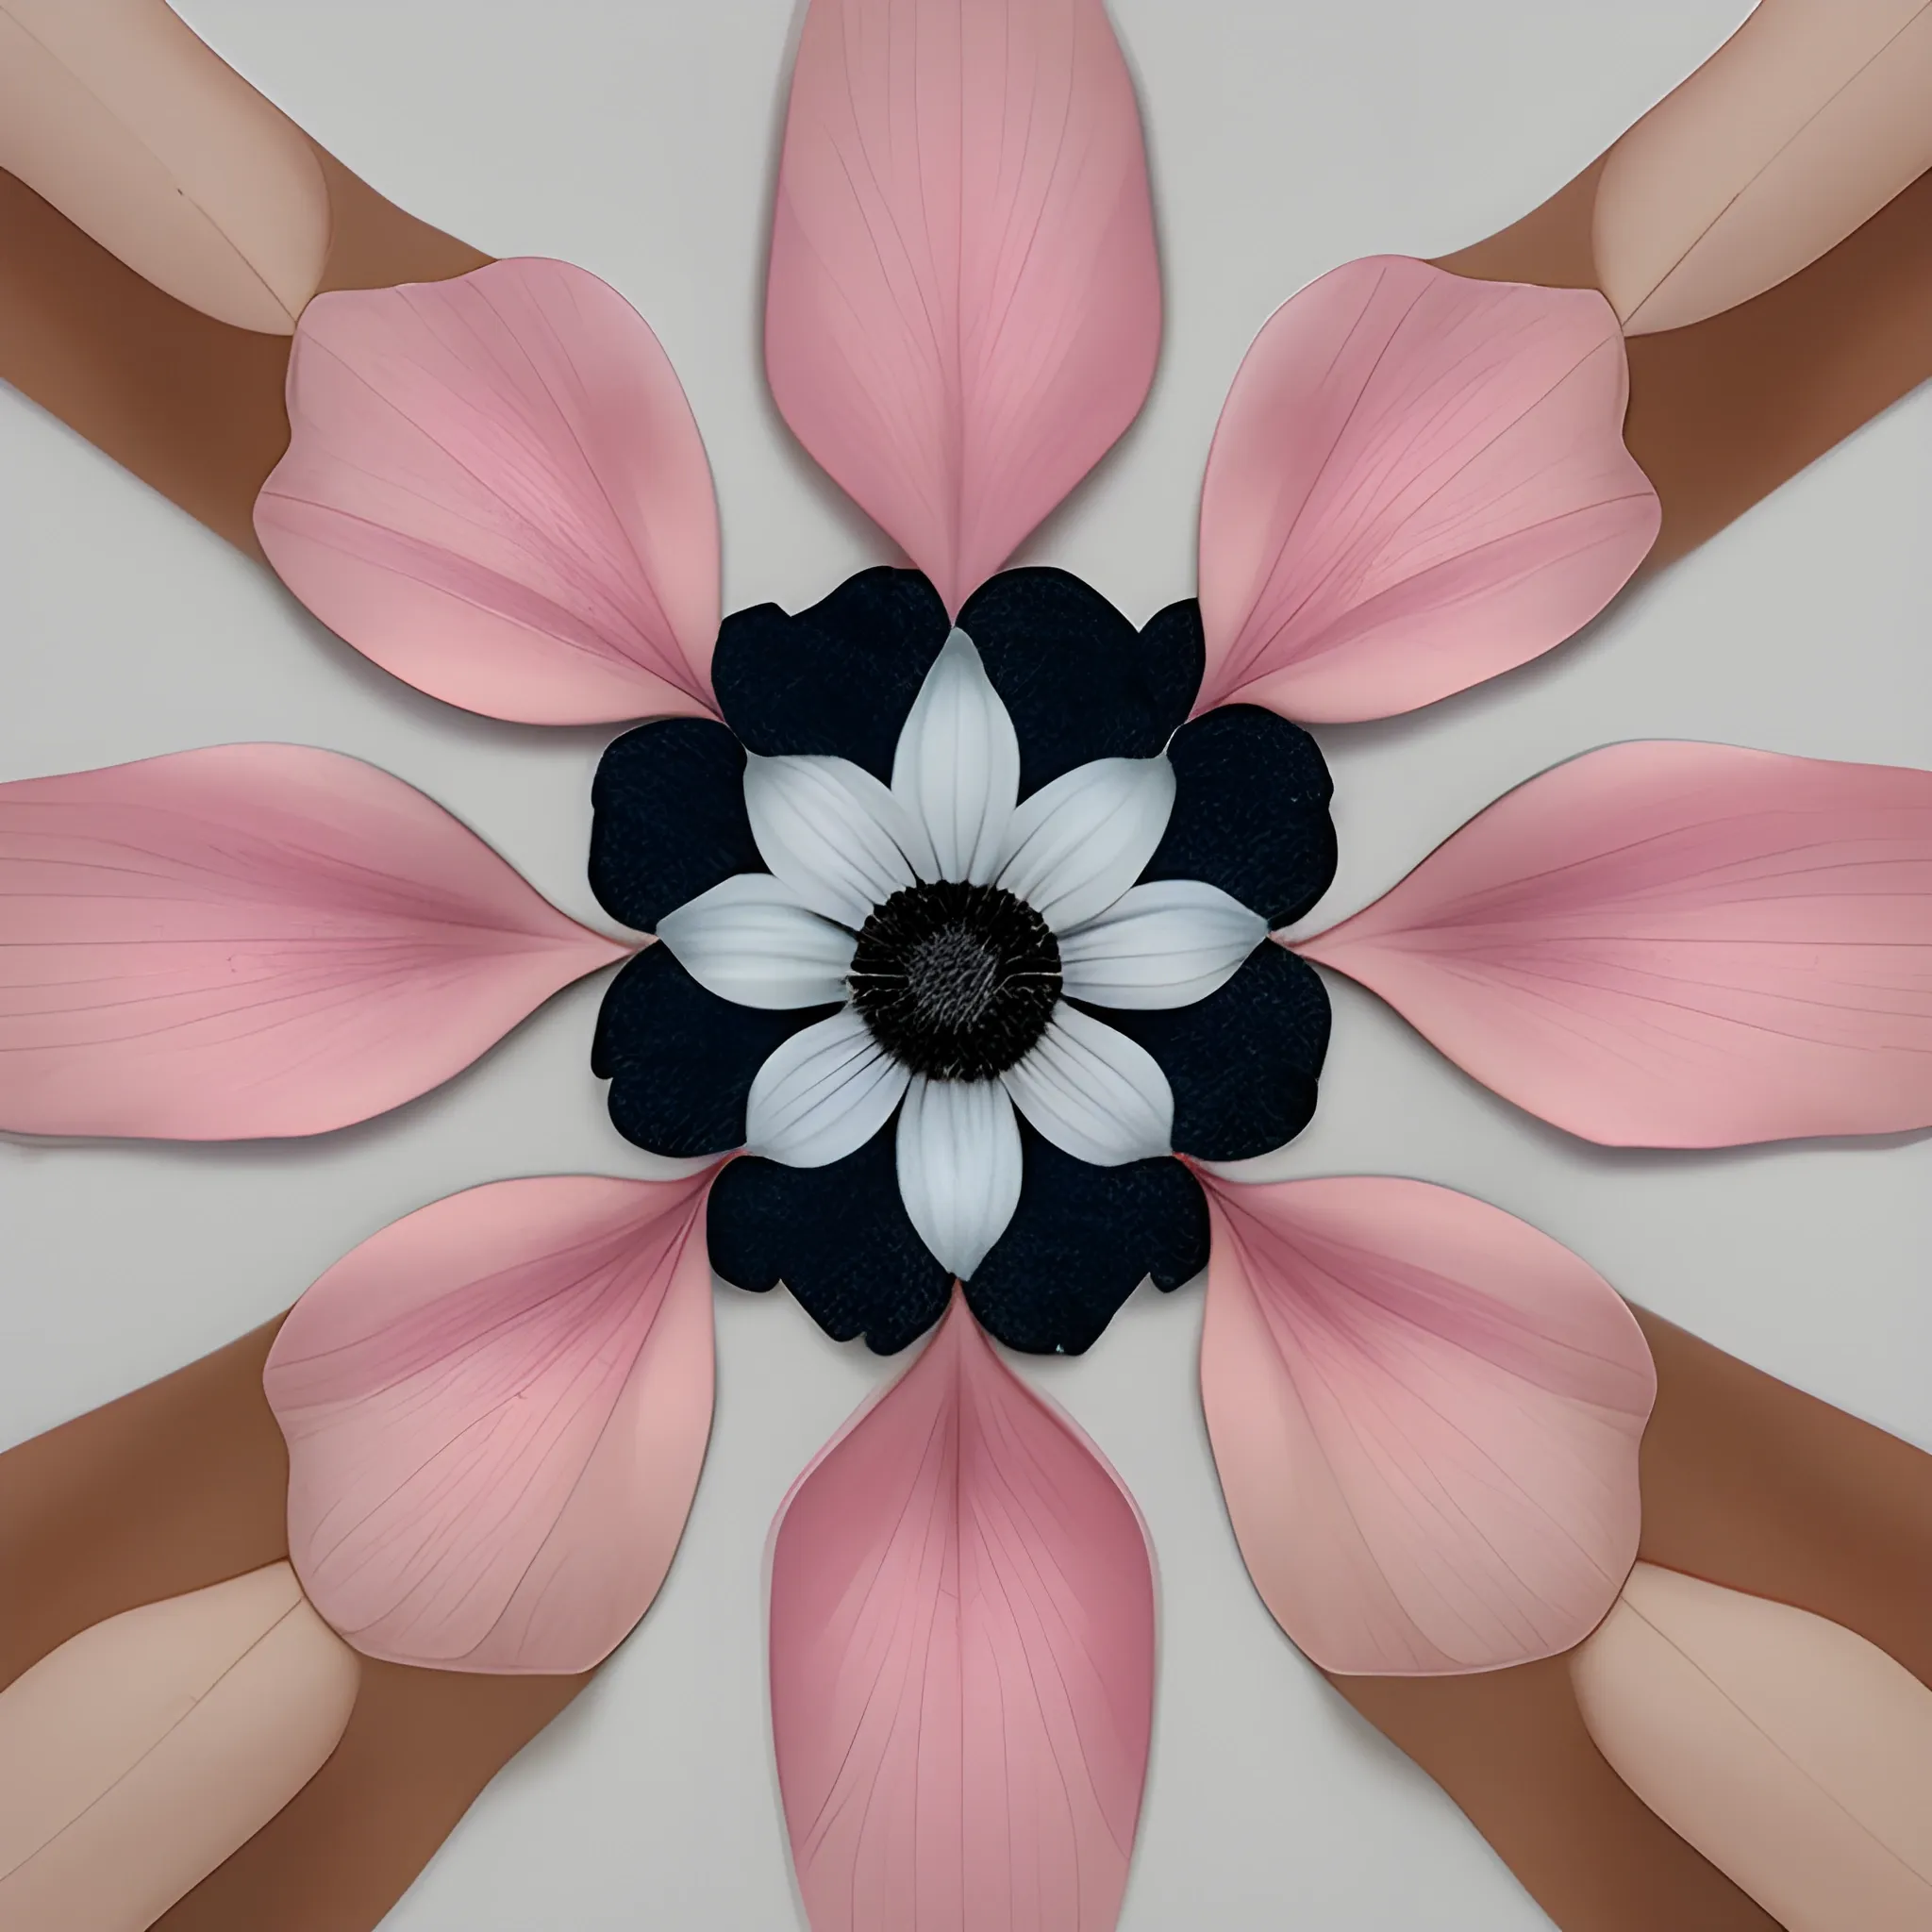 recreate the last but with only 6 petals